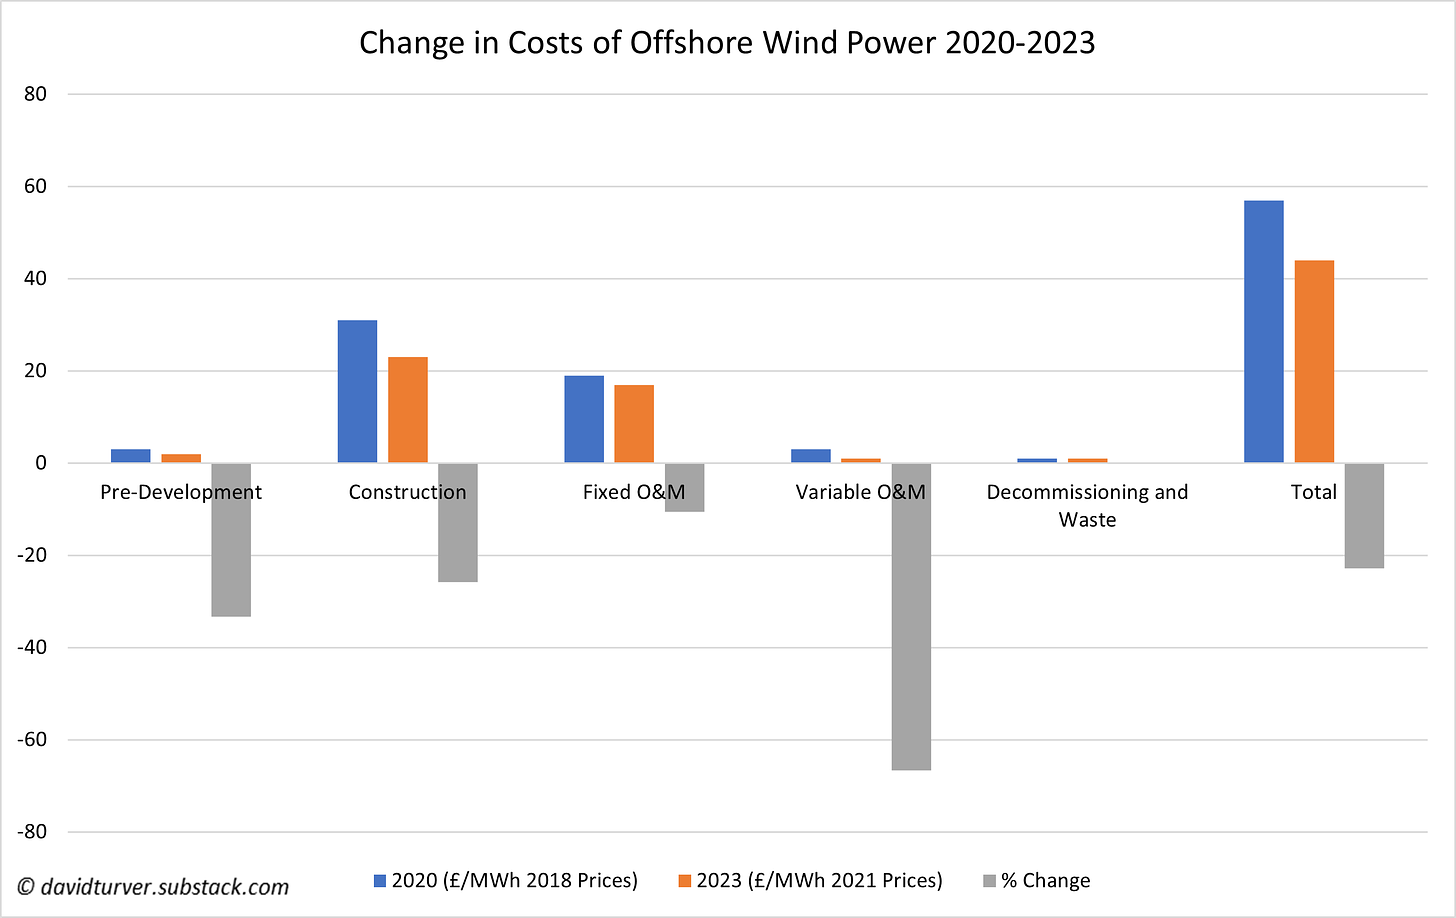 Figure 3 - Change in the cost of Offshore Wind Electricity Generation 2020 to 2023